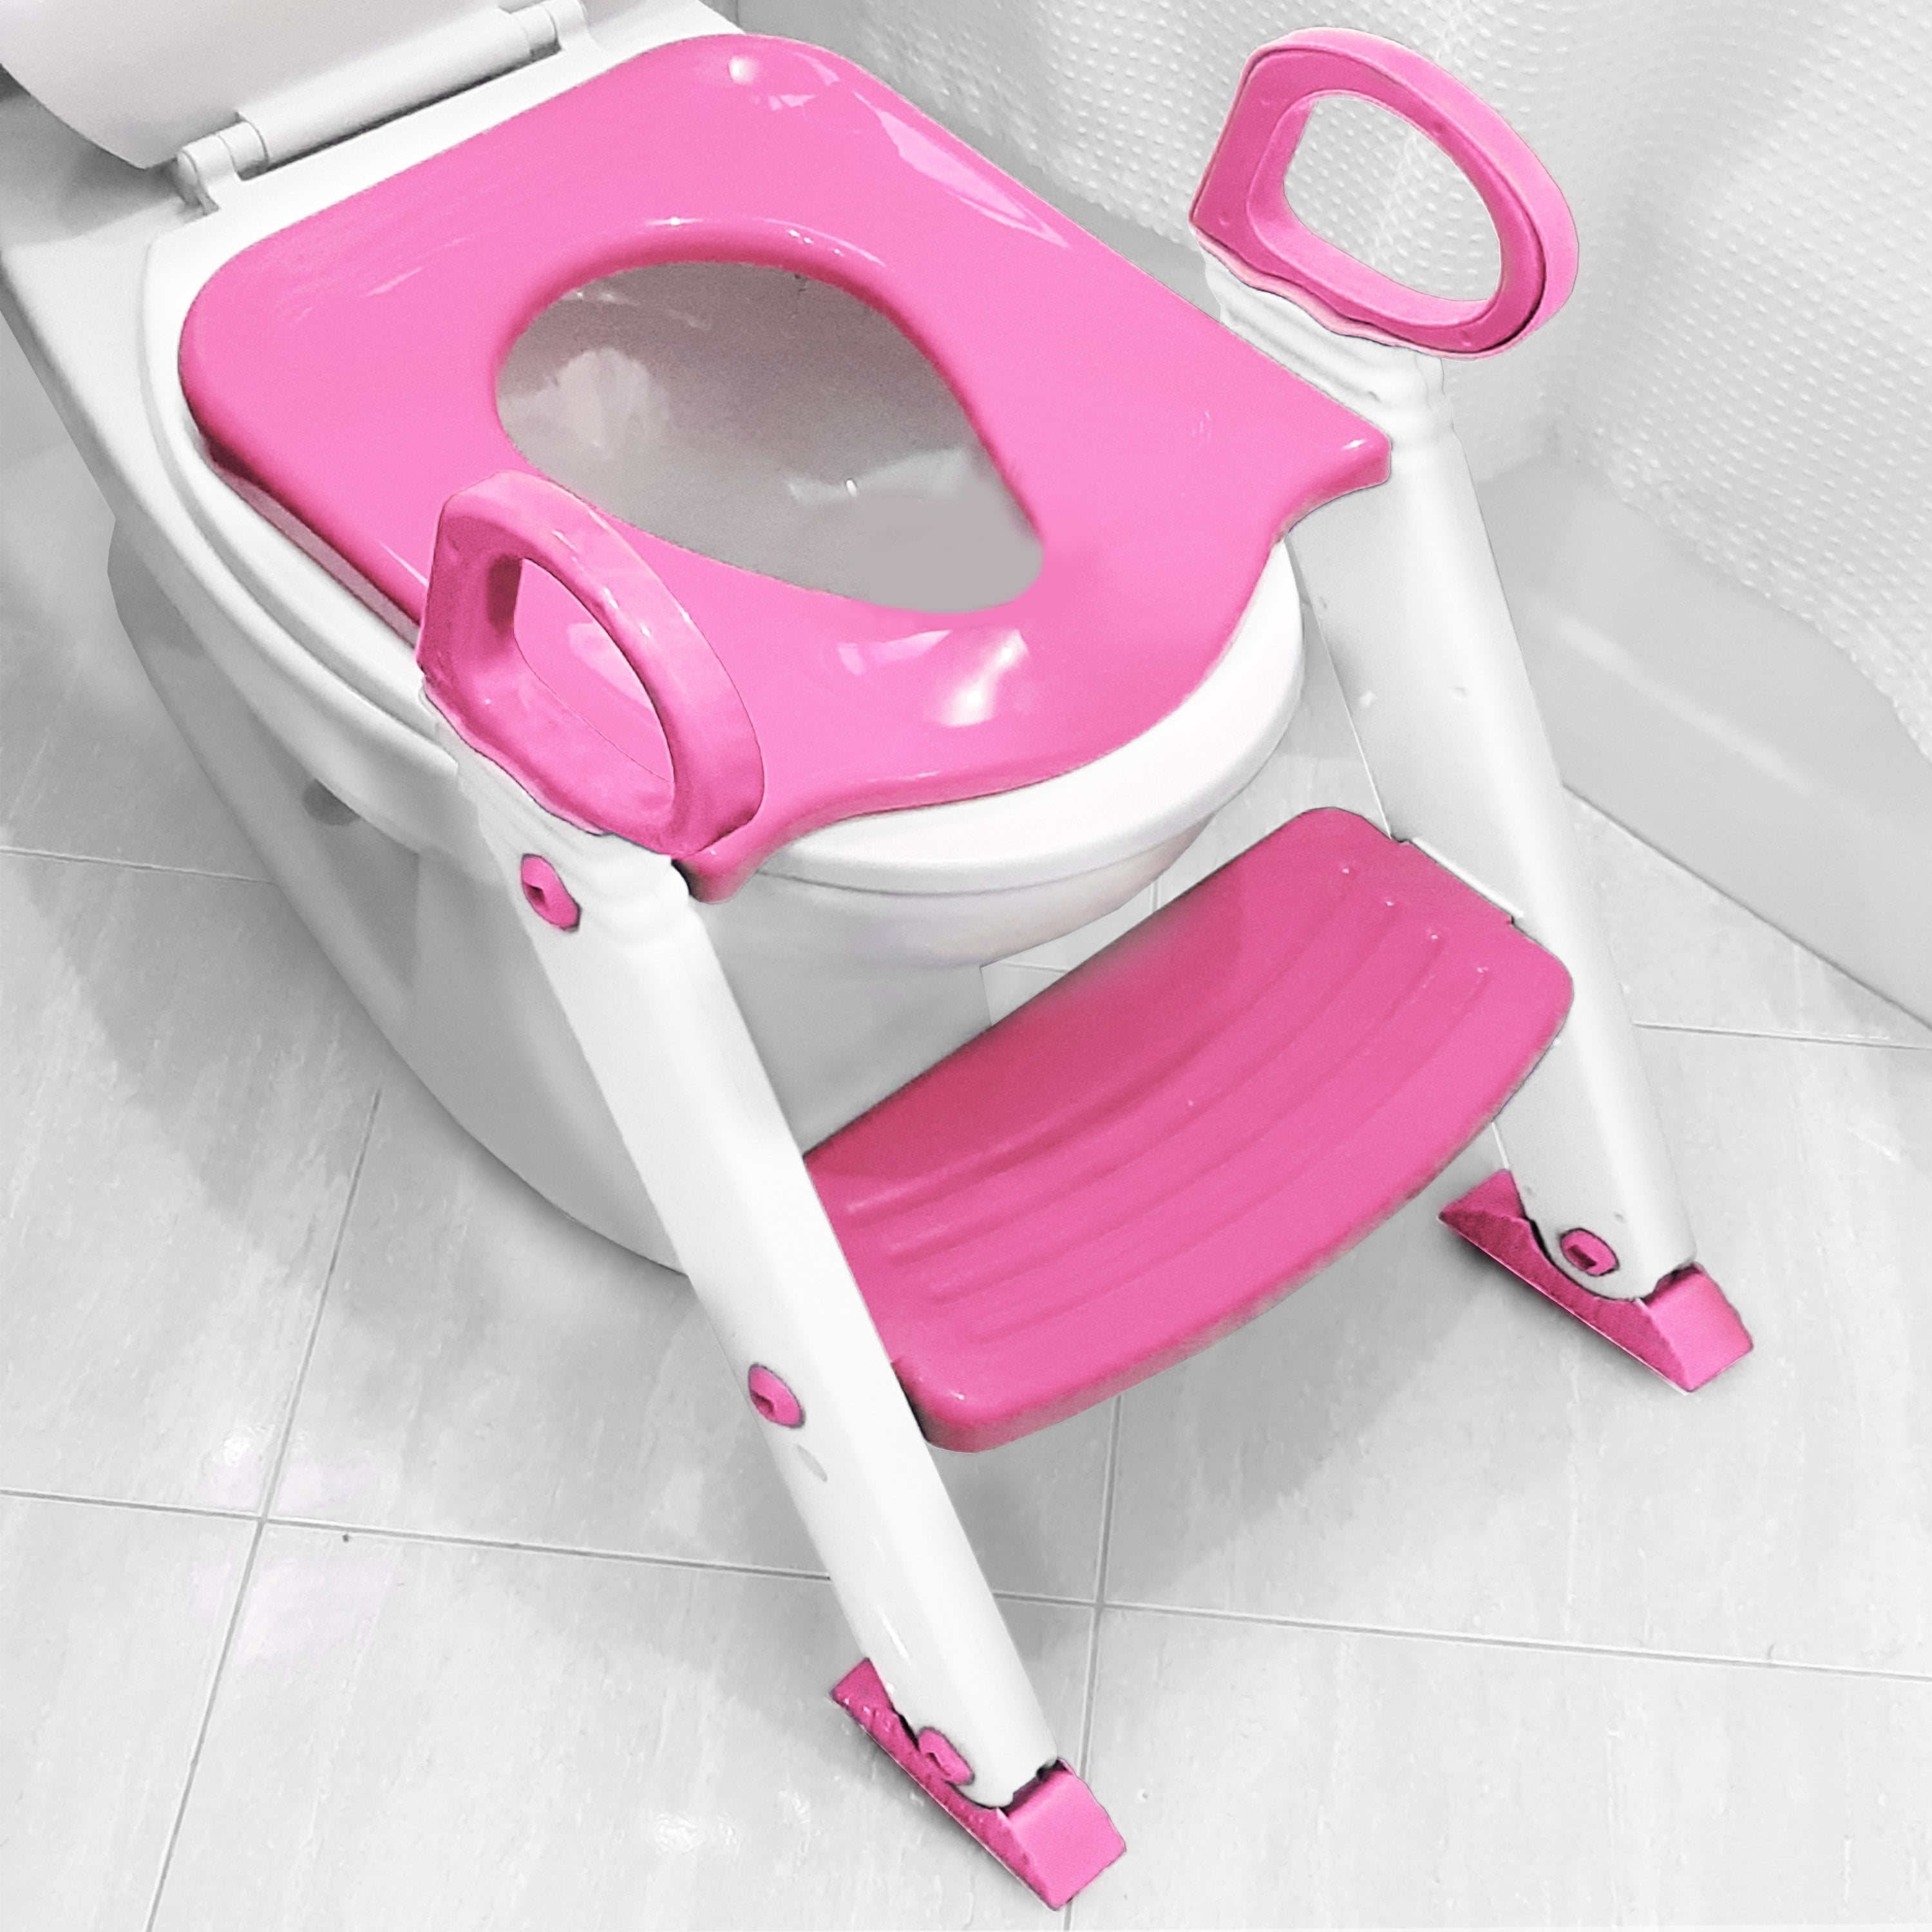 Baby Kids Training Toilet Seat Safety Potty Step Ladder Trainer Chair Foldable 